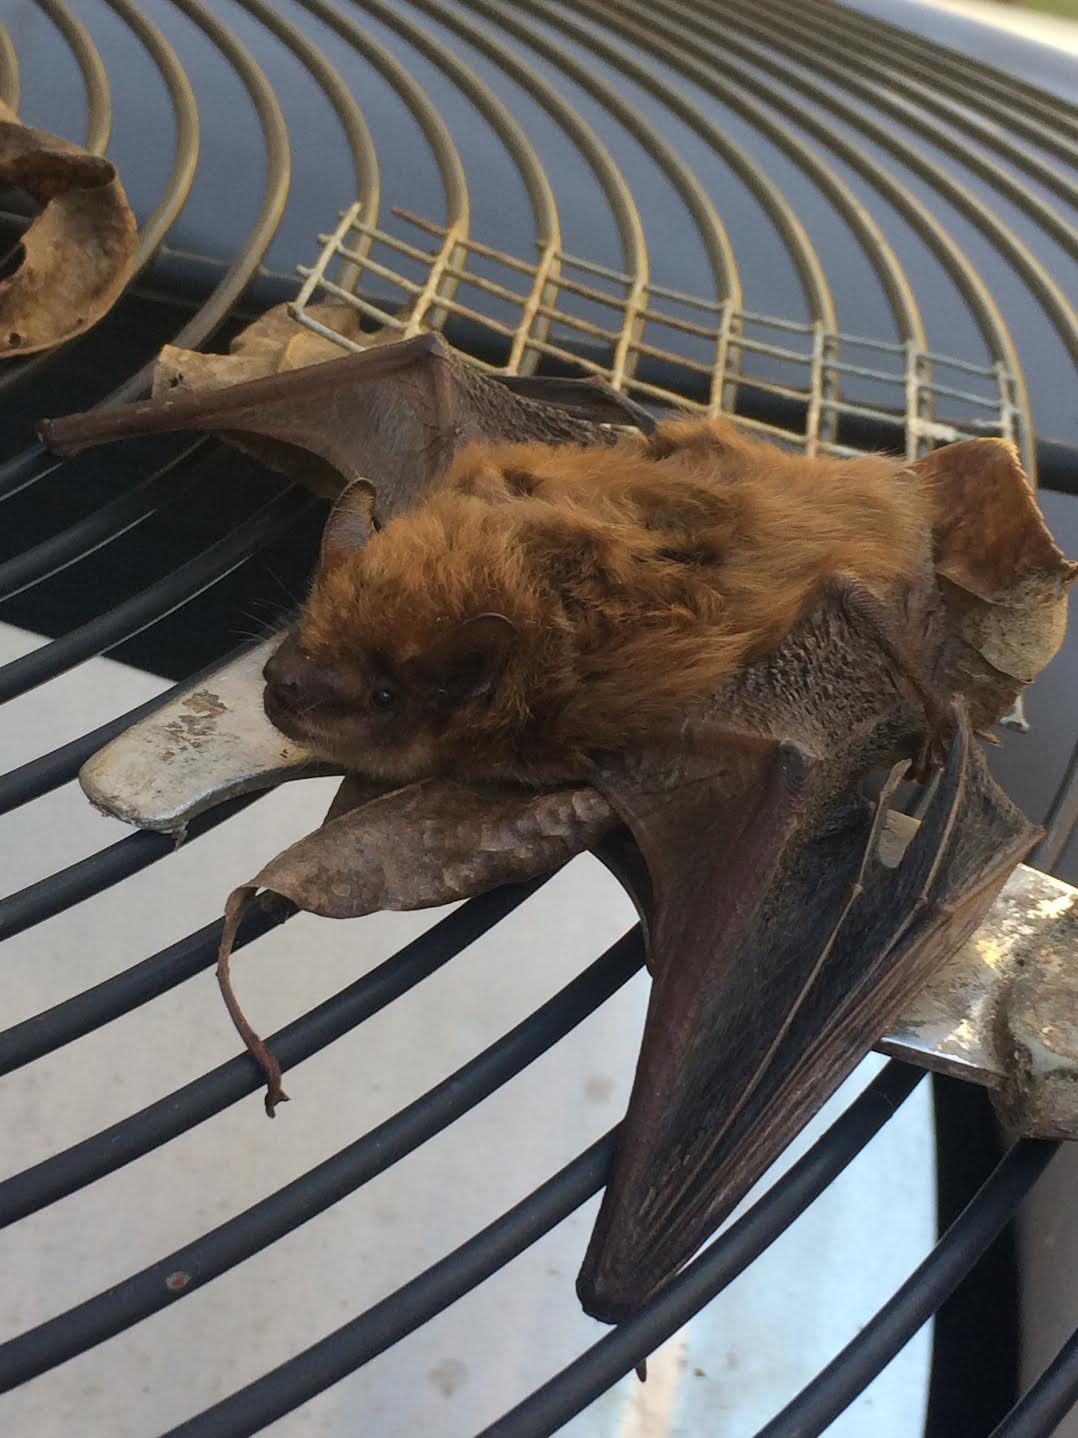 We removed this bat from a home in Blyhewood, South Carolina. We provide any necessary decontamination or restoration services to ensure that your home is clean and safe and that bats stay outside where they belong.